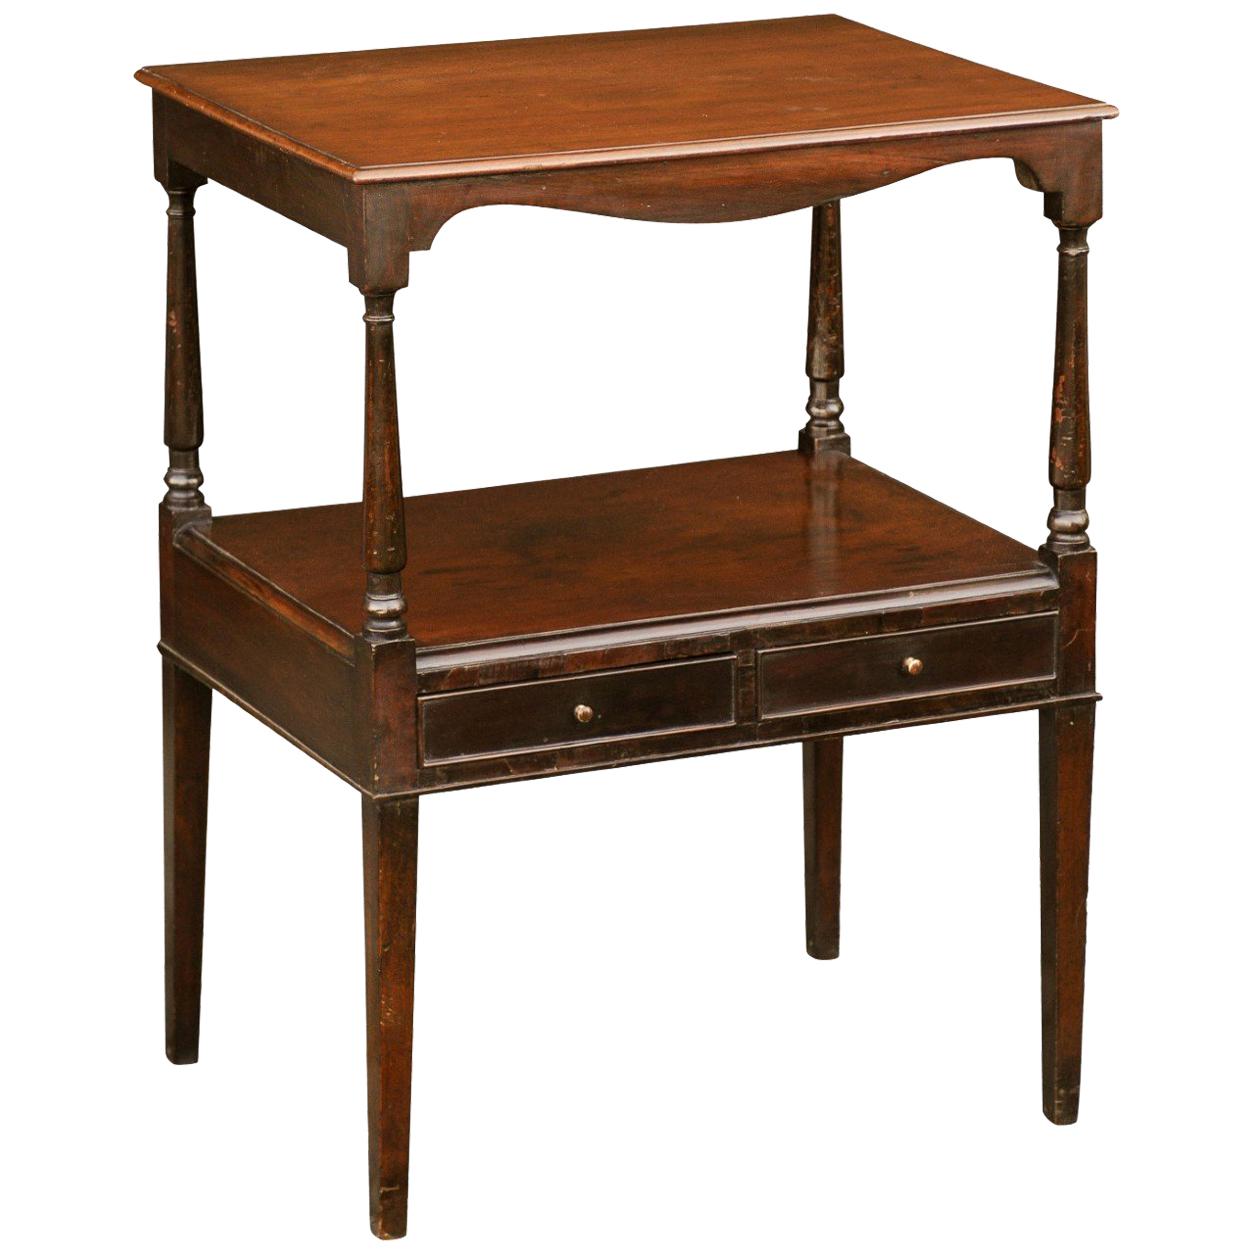 French 1880s Tiered Mahogany Table with Valanced Apron, Lower Shelf and Drawers